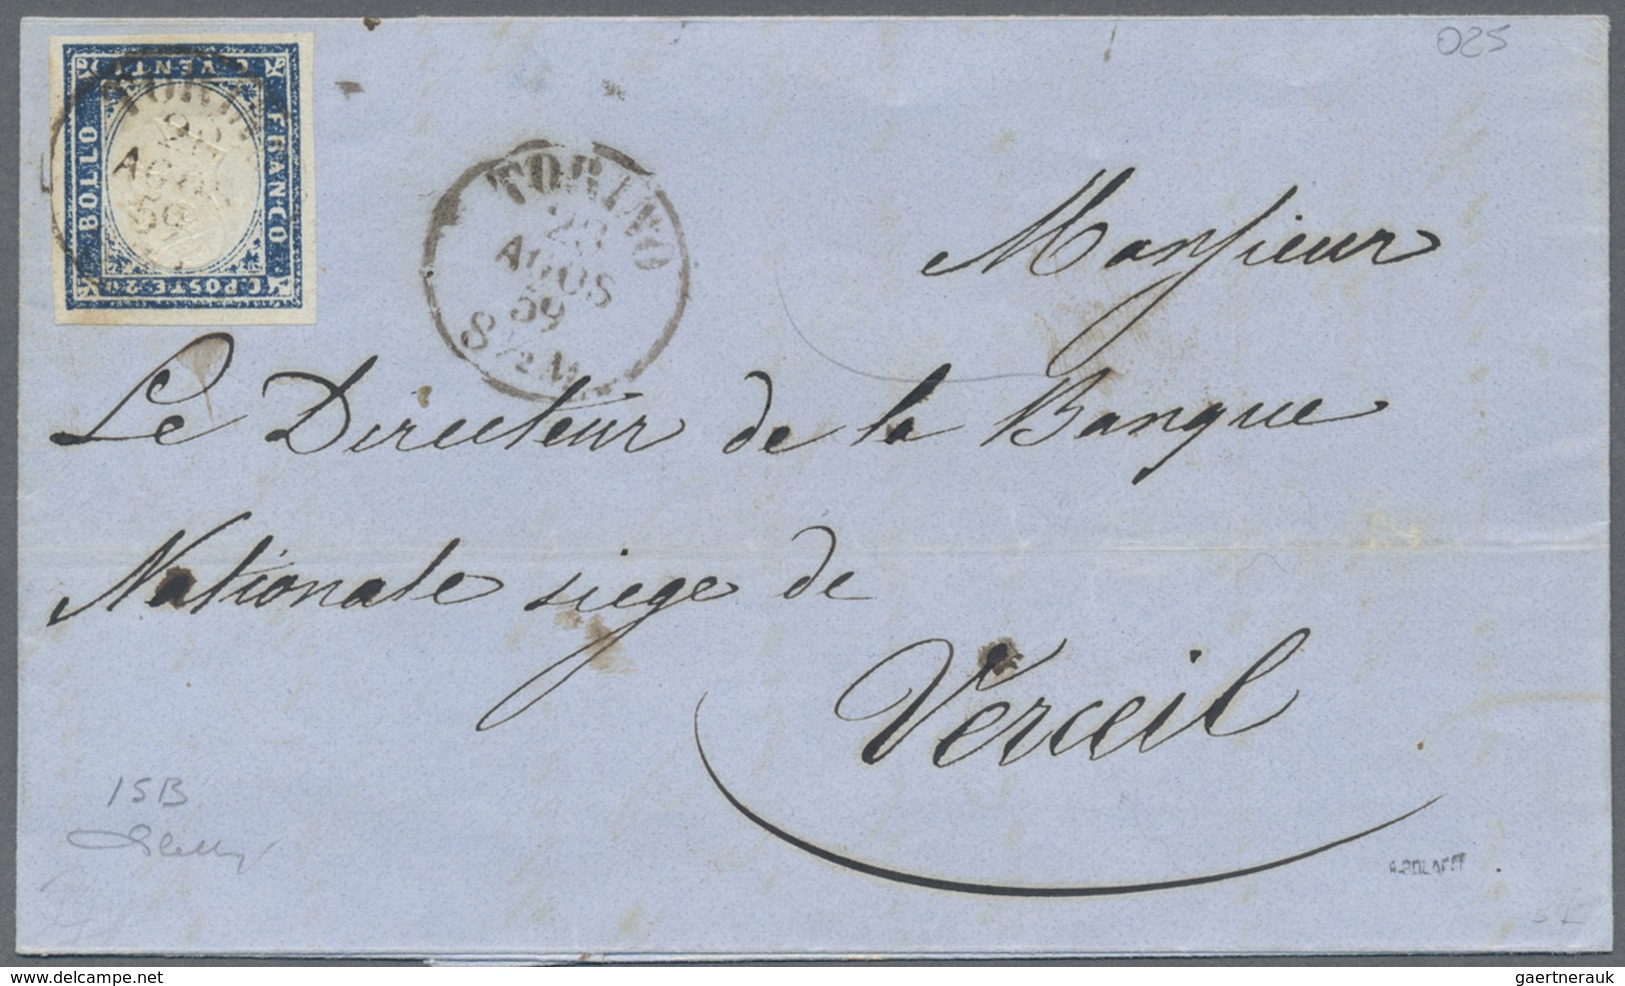 Br Italien - Altitalienische Staaten: Sardinien: 1857/1862: lot of 10 letters franked with the the blue